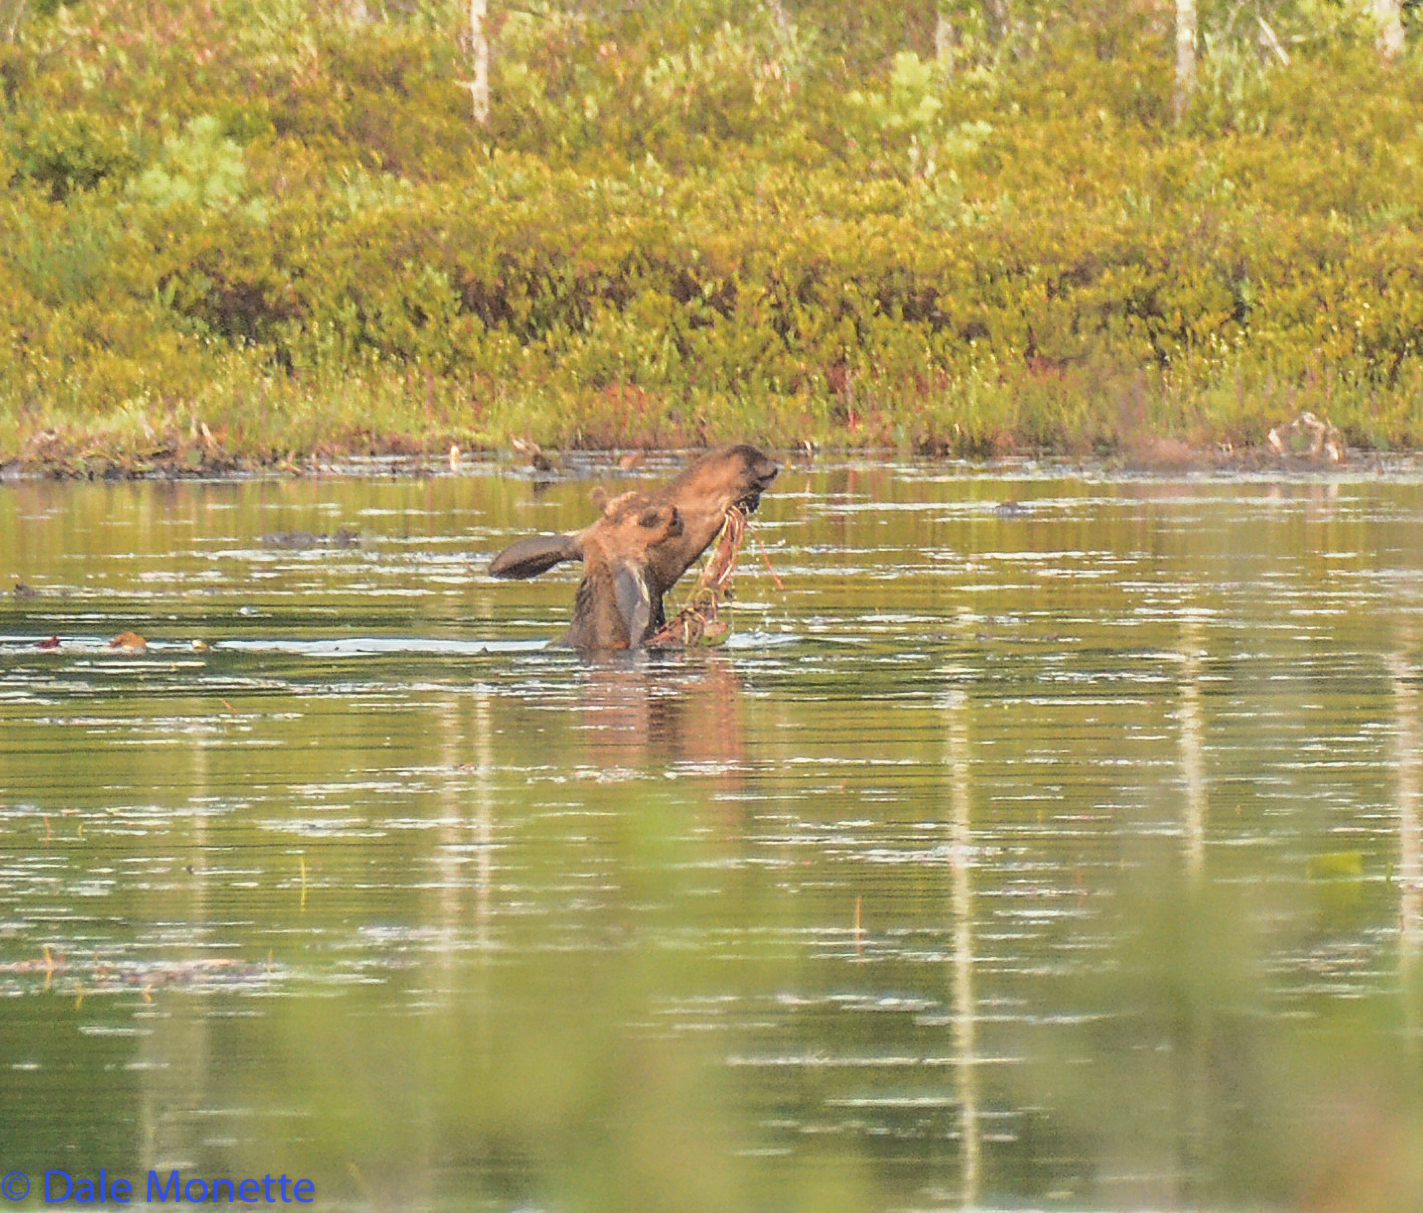   Here's a young bull in August working on some tasty pond lillies right up to his neck in a small beaver pond.  